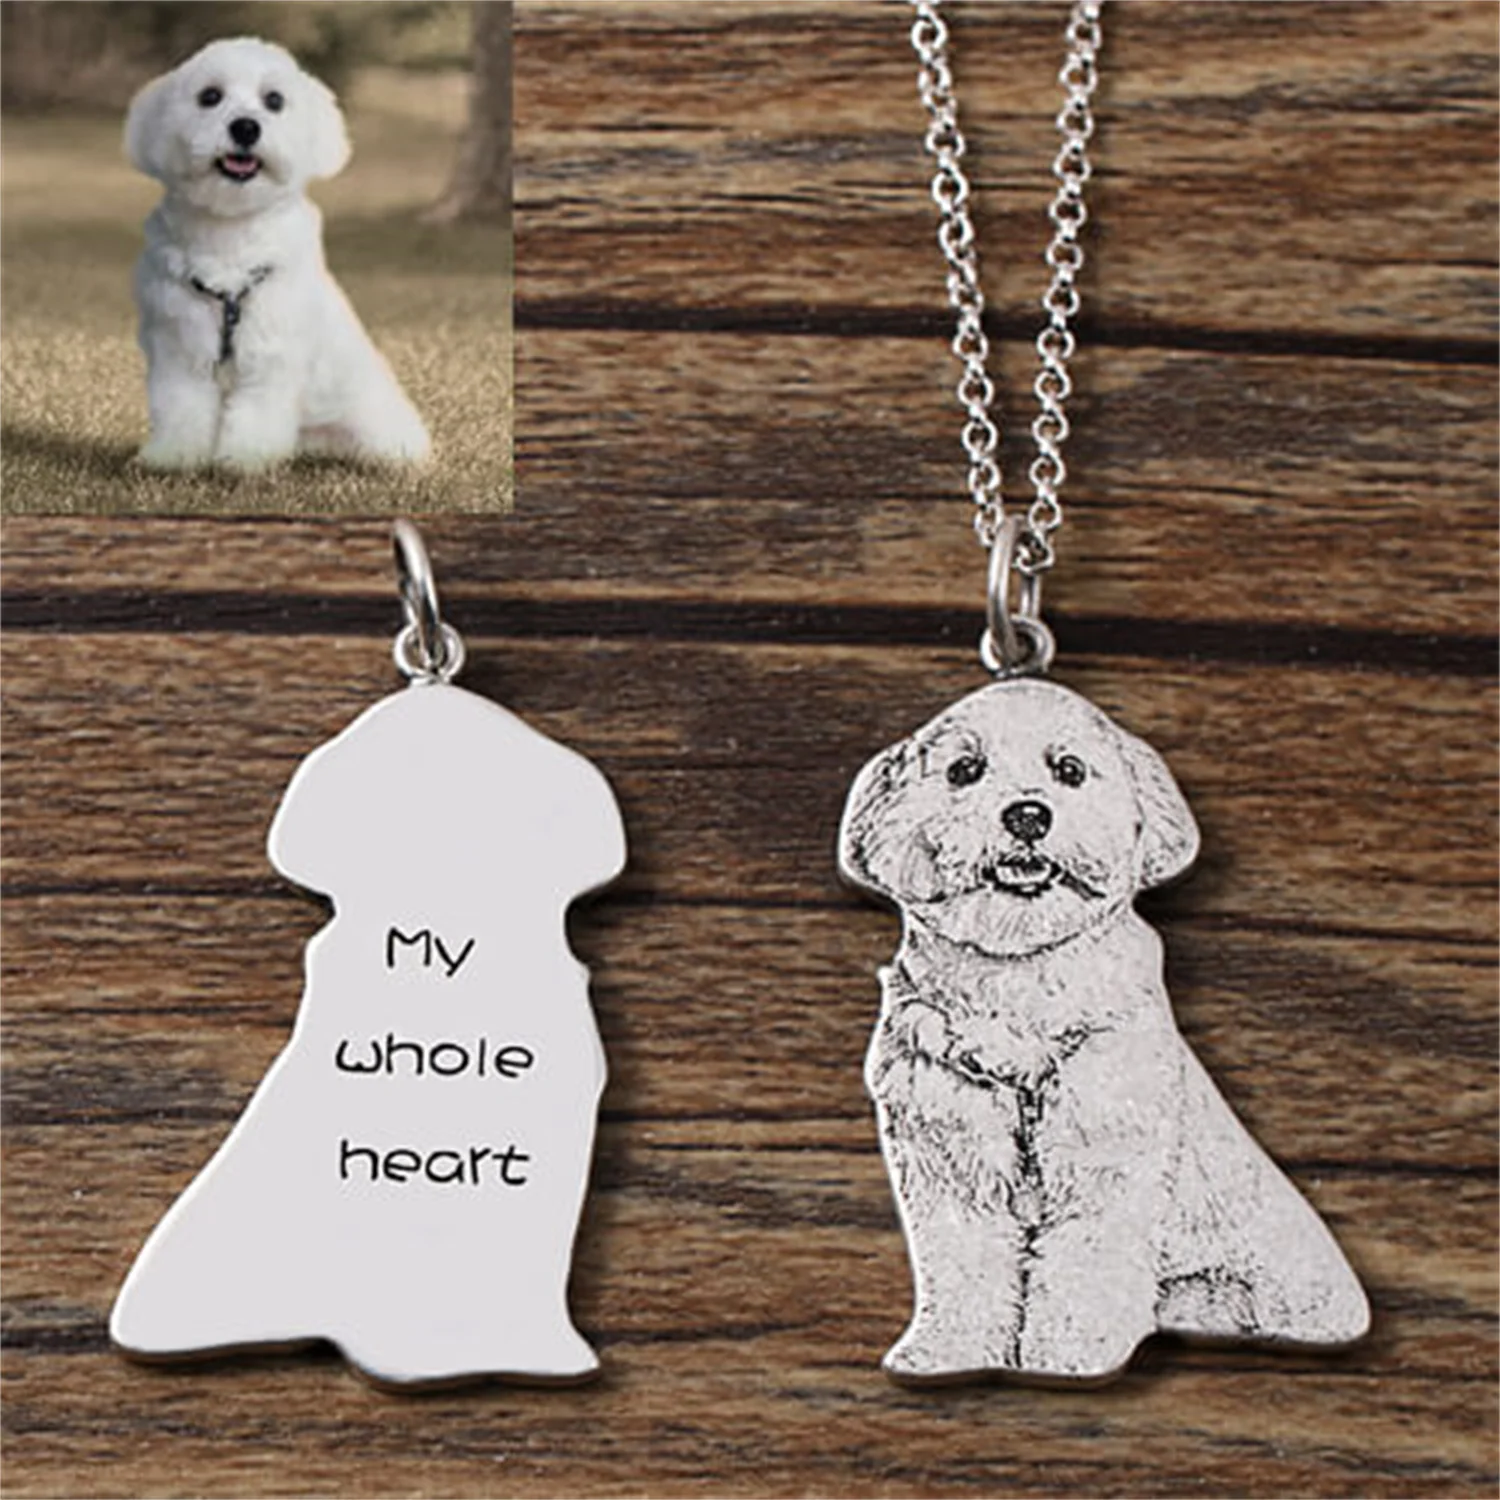 Personalized Portrait Necklace With Your Pet's Photo Gift For Pet Lovers Custom Engraved Cat Dog Name Keepsake Gift For Her